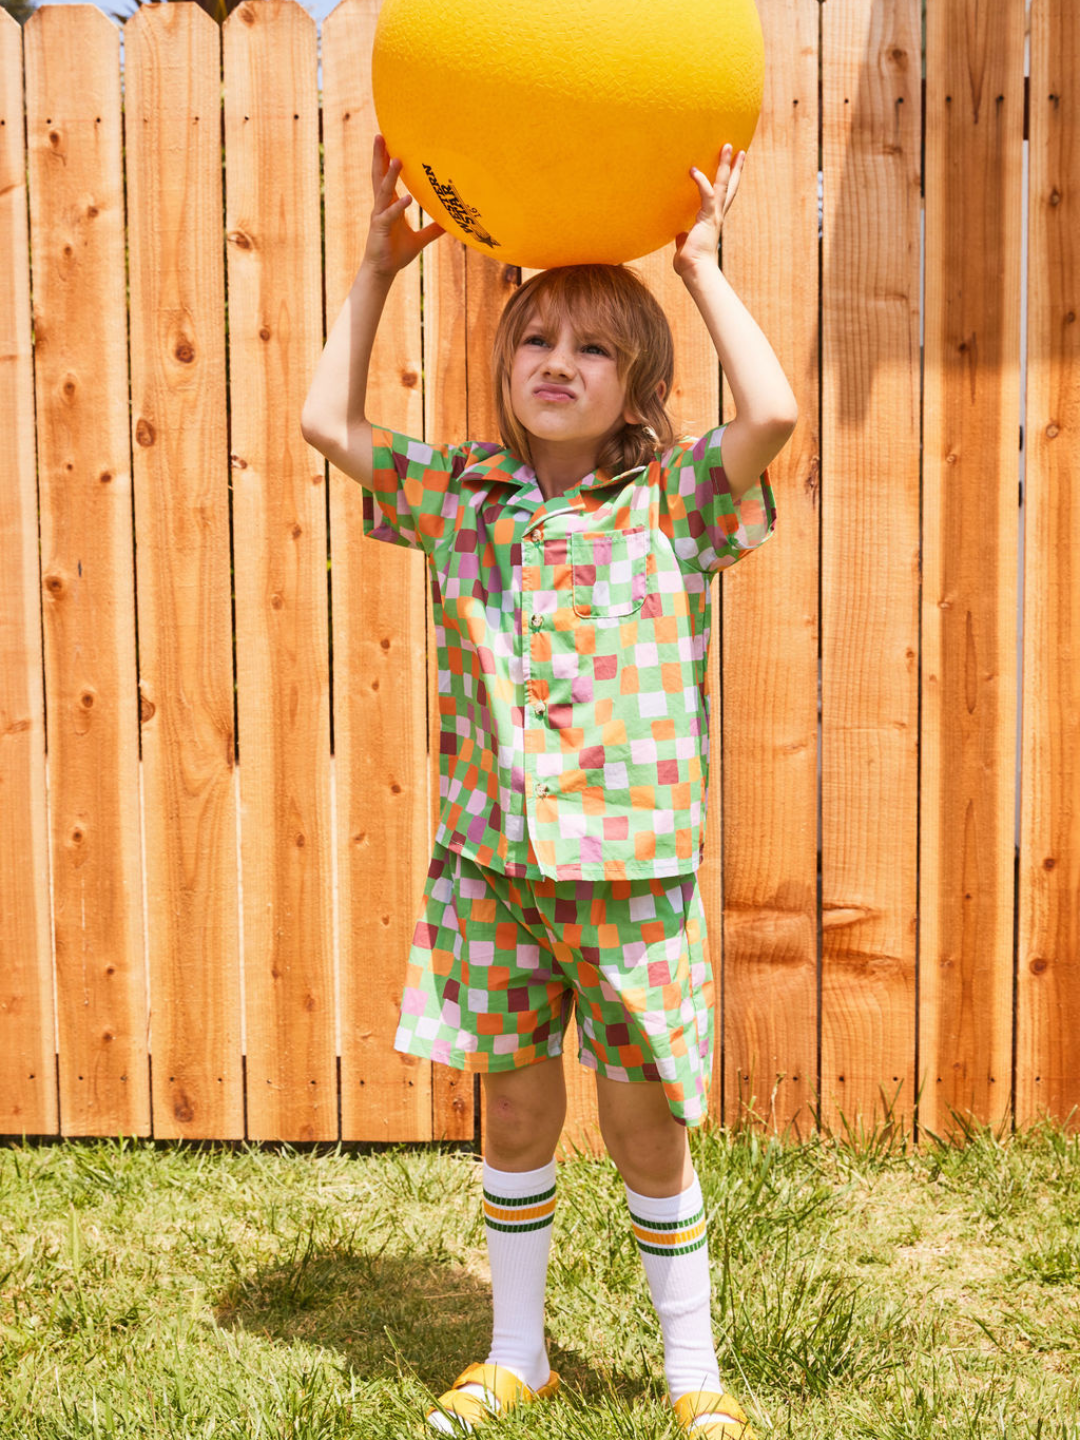 Green | A child balancing a ball on his head, wearing a kids' shirt and shorts set in a pattern of purple, pink, gold and orange squares on a green background